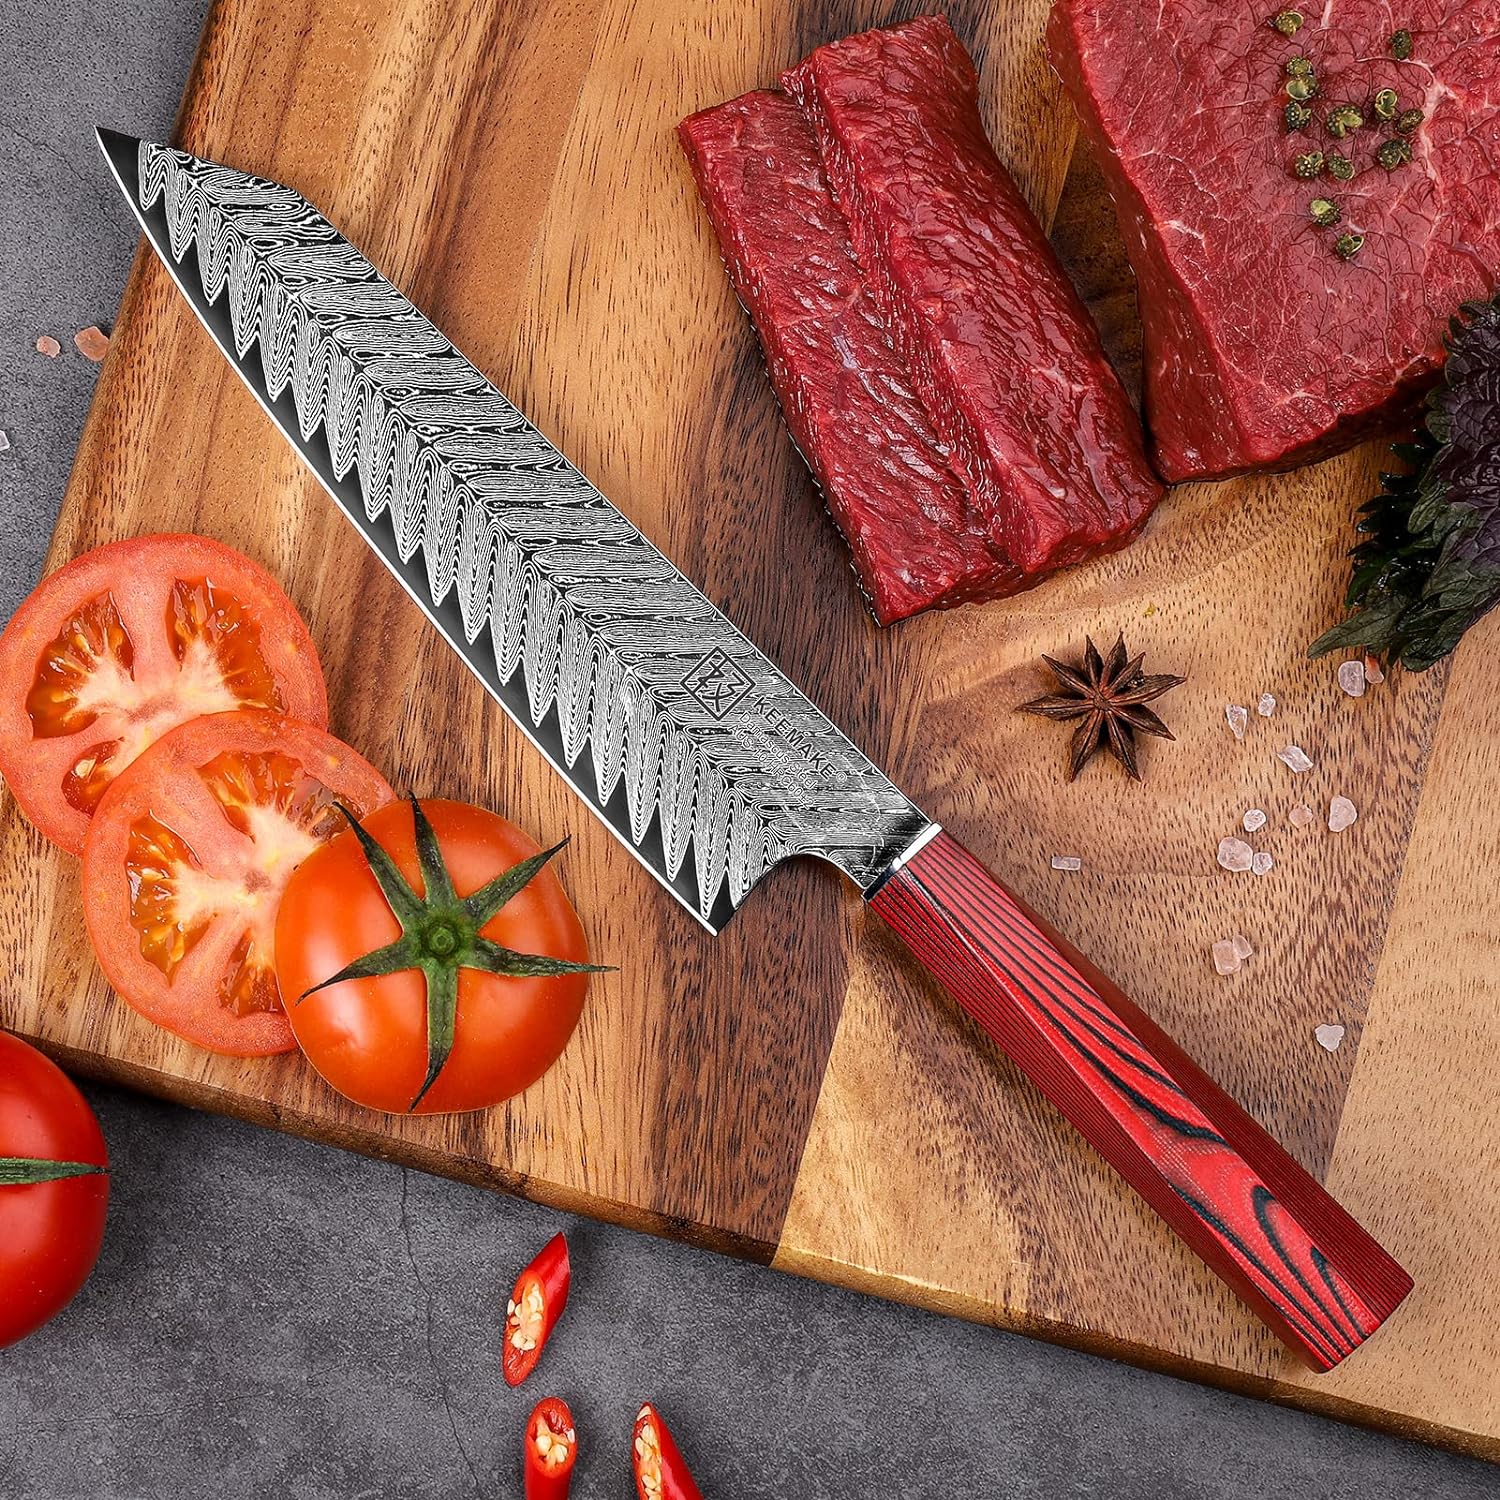 Keemake kitchen knife 8inch Gyuto chef's knife 67 layers Damascus stainless steel  for kitchen meat cutting(Red G10 Handle)